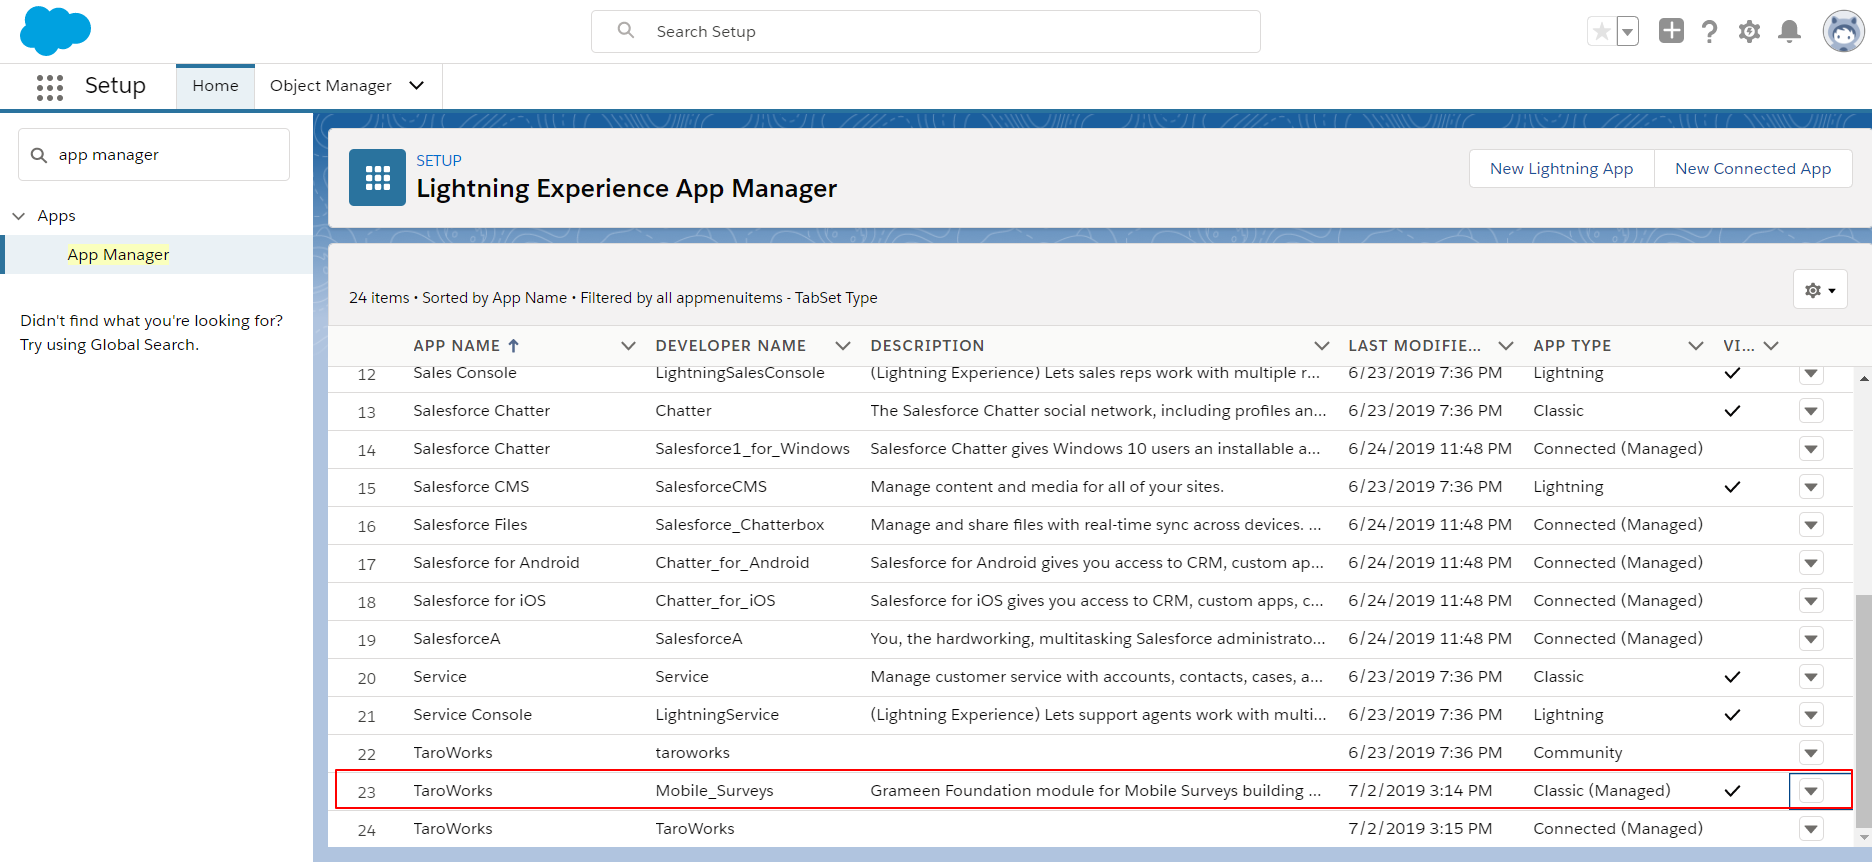 AwesomeScreenshot-App-Manager-Salesforce-2019-07-22-14-07-48.png